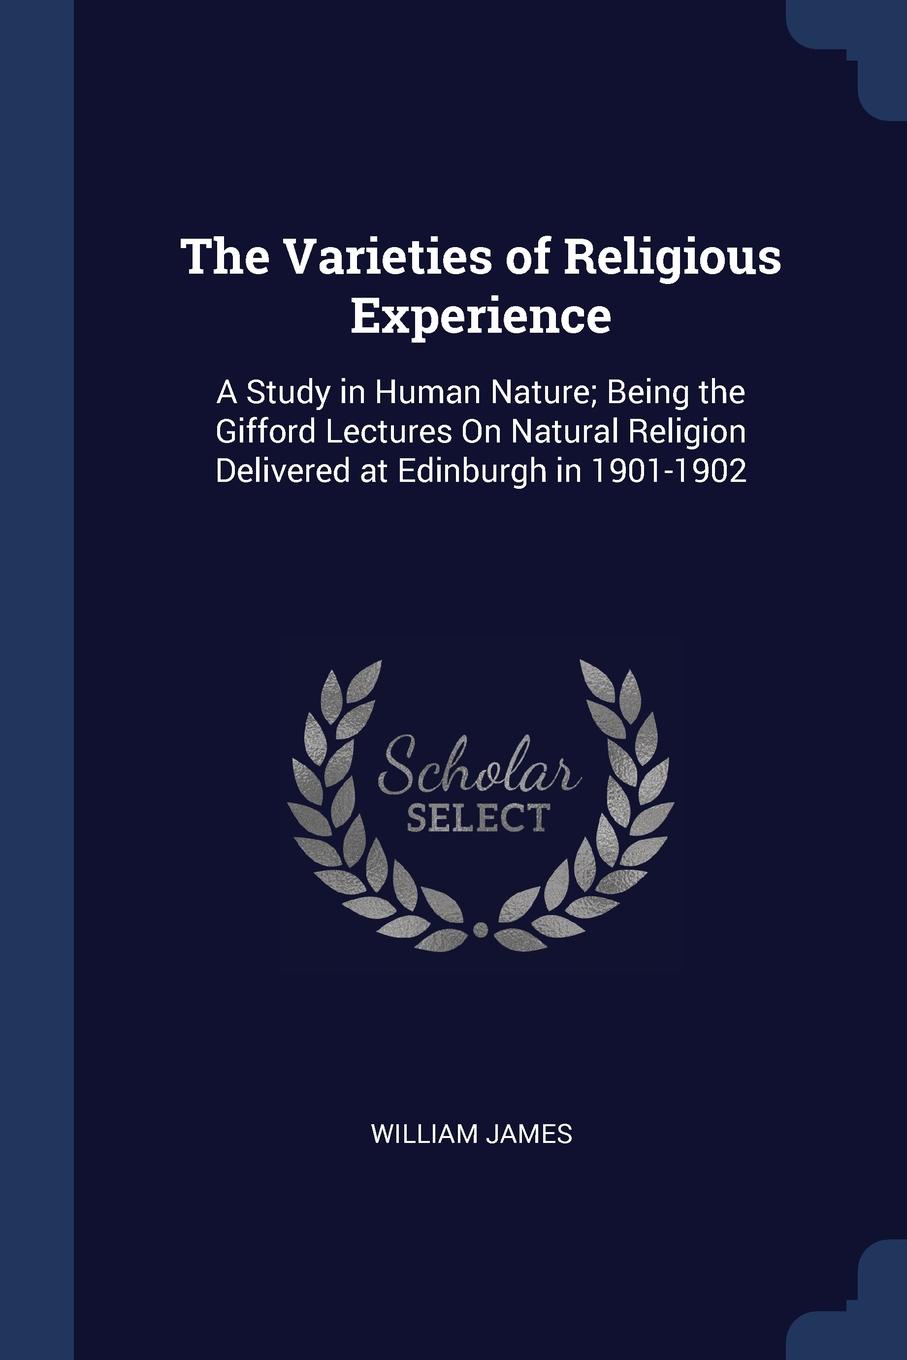 The Varieties of Religious Experience. A Study in Human Nature; Being the Gifford Lectures On Natural Religion Delivered at Edinburgh in 1901-1902